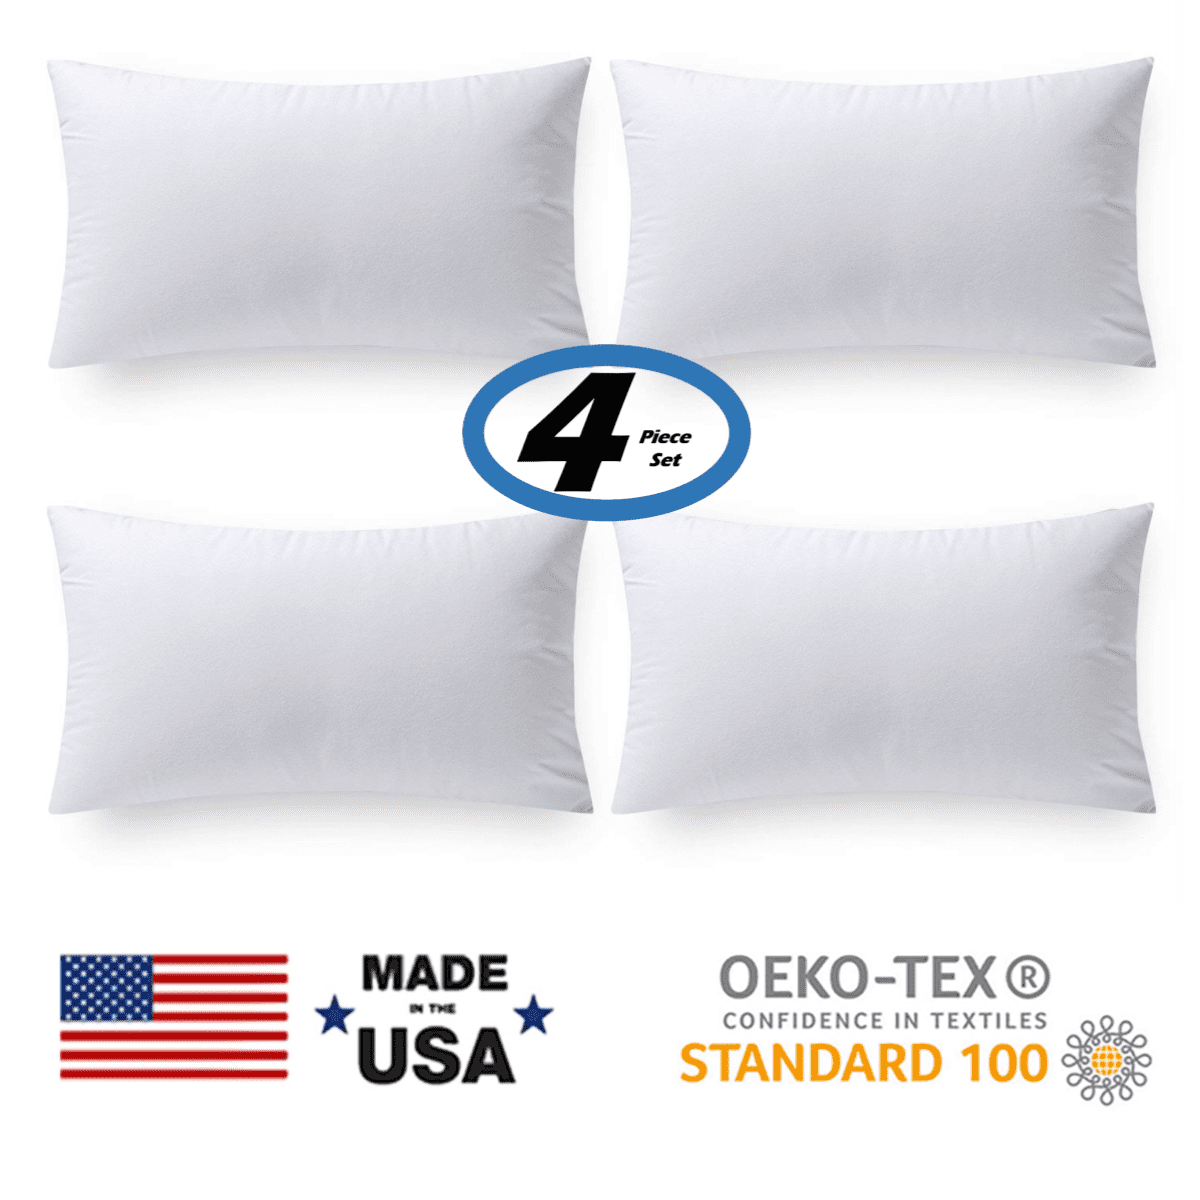  Pack of 4 Pal Fabric 18x18 Soft Microfiber White Square Pillow  Insert for Sofa Form Cushion Sham or Decorative Pillow Made in USA (18x18)  : Home & Kitchen